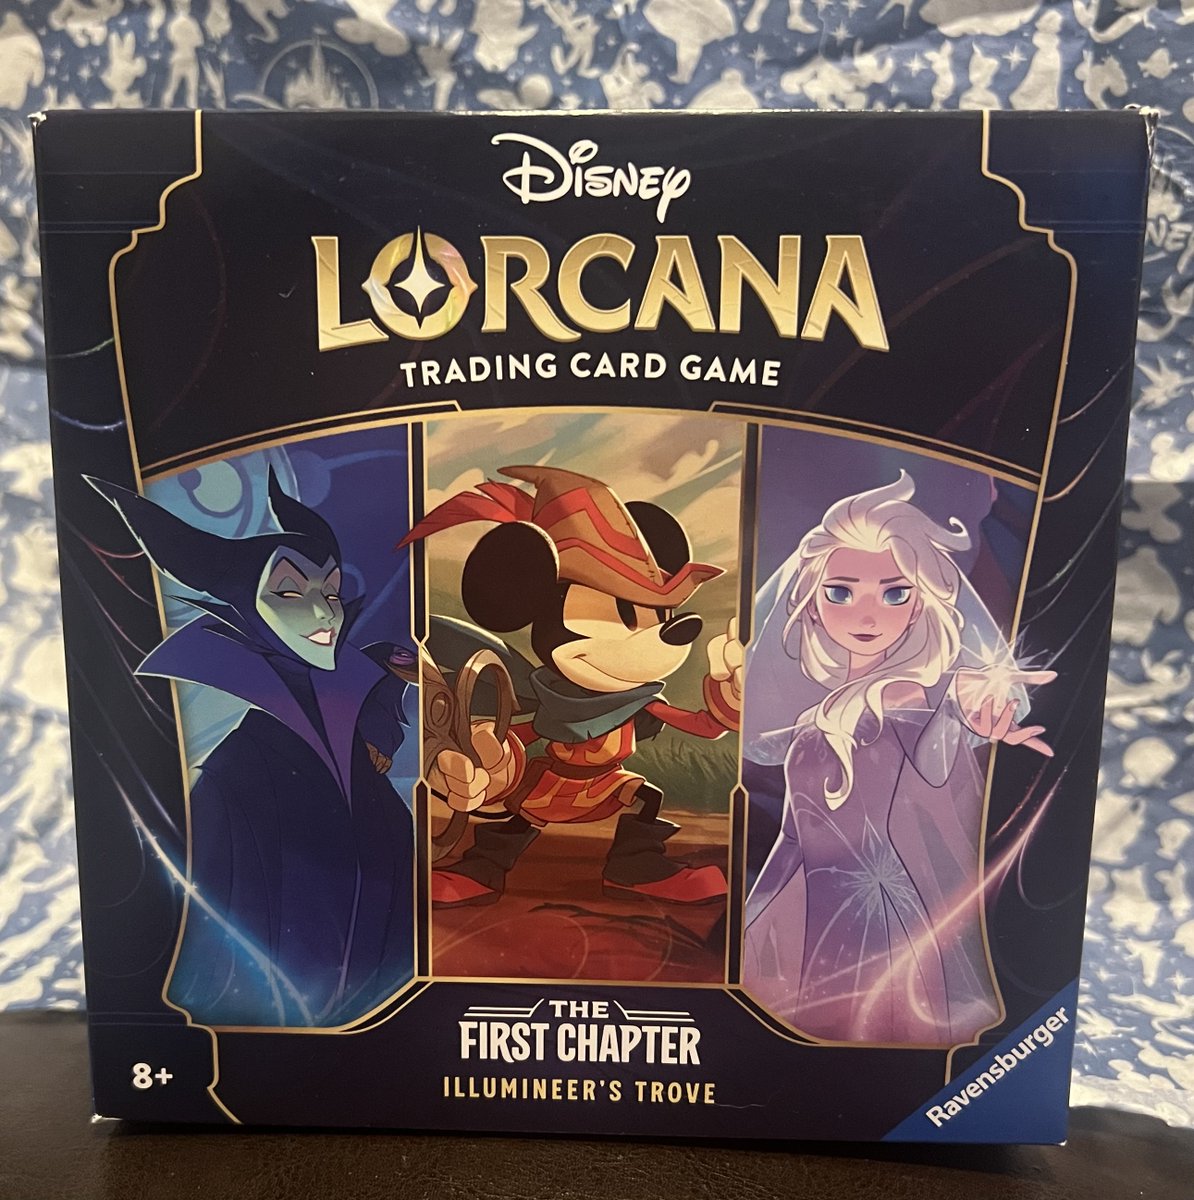 NEW SEALED #DisneyLorcana ~ The First Chapter #IllumineersTrove ~ NEW Sealed FREE SHIP

#tradingcards #disneycards #thefirstchapter #sealedbox #factorysealed #disneygamecards #cardgame #collectibles #collectiblecards #disney #ebayfinds #ravensburger

 ebay.com/itm/2666536617…